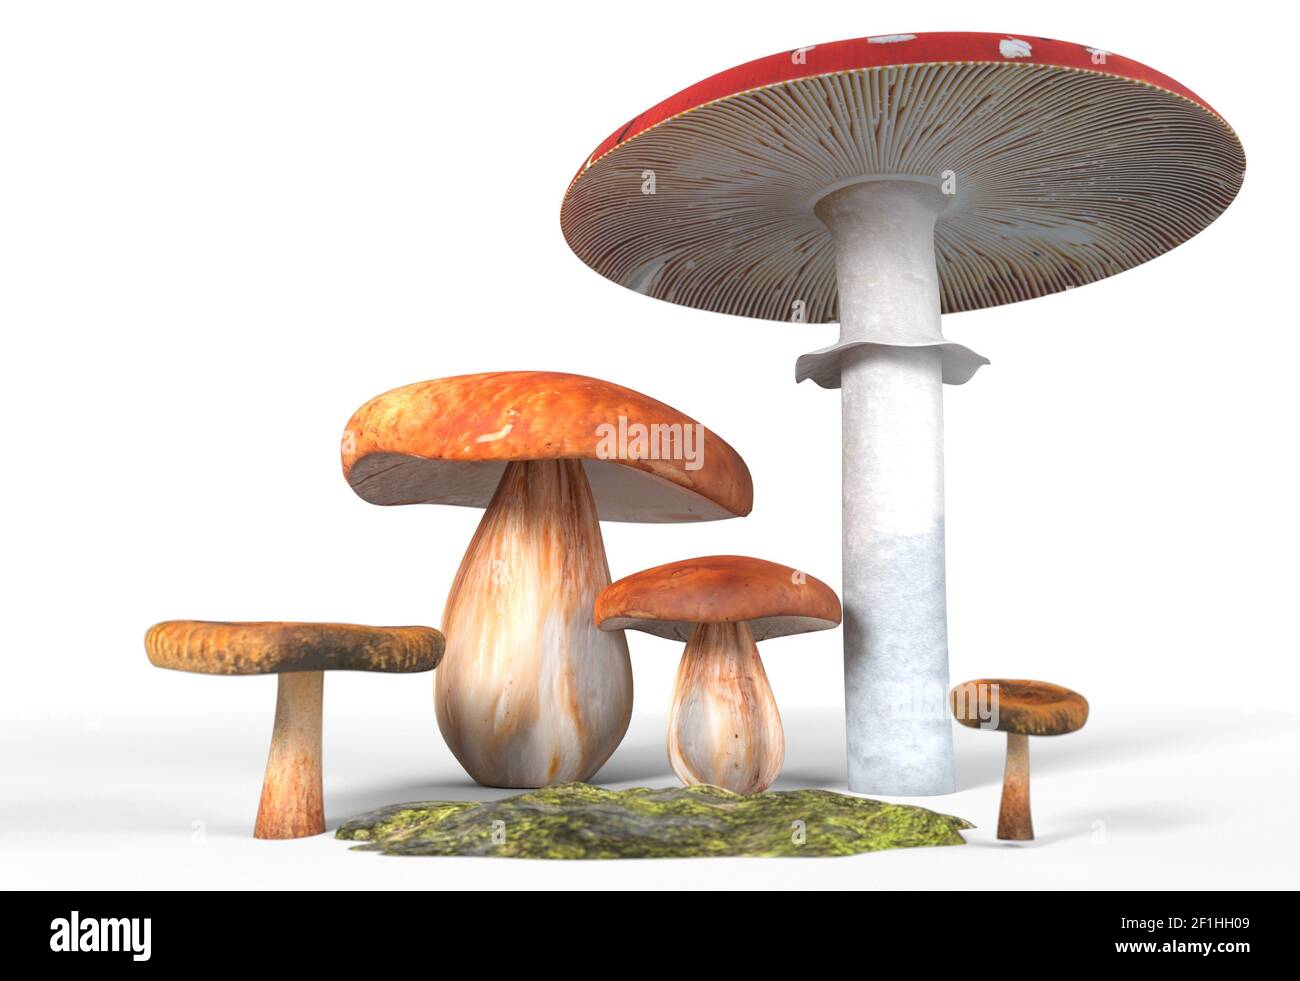 Ceps, paxil, amanita muscaria mushrooms with moss isolated on white 3d illustration Stock Photo